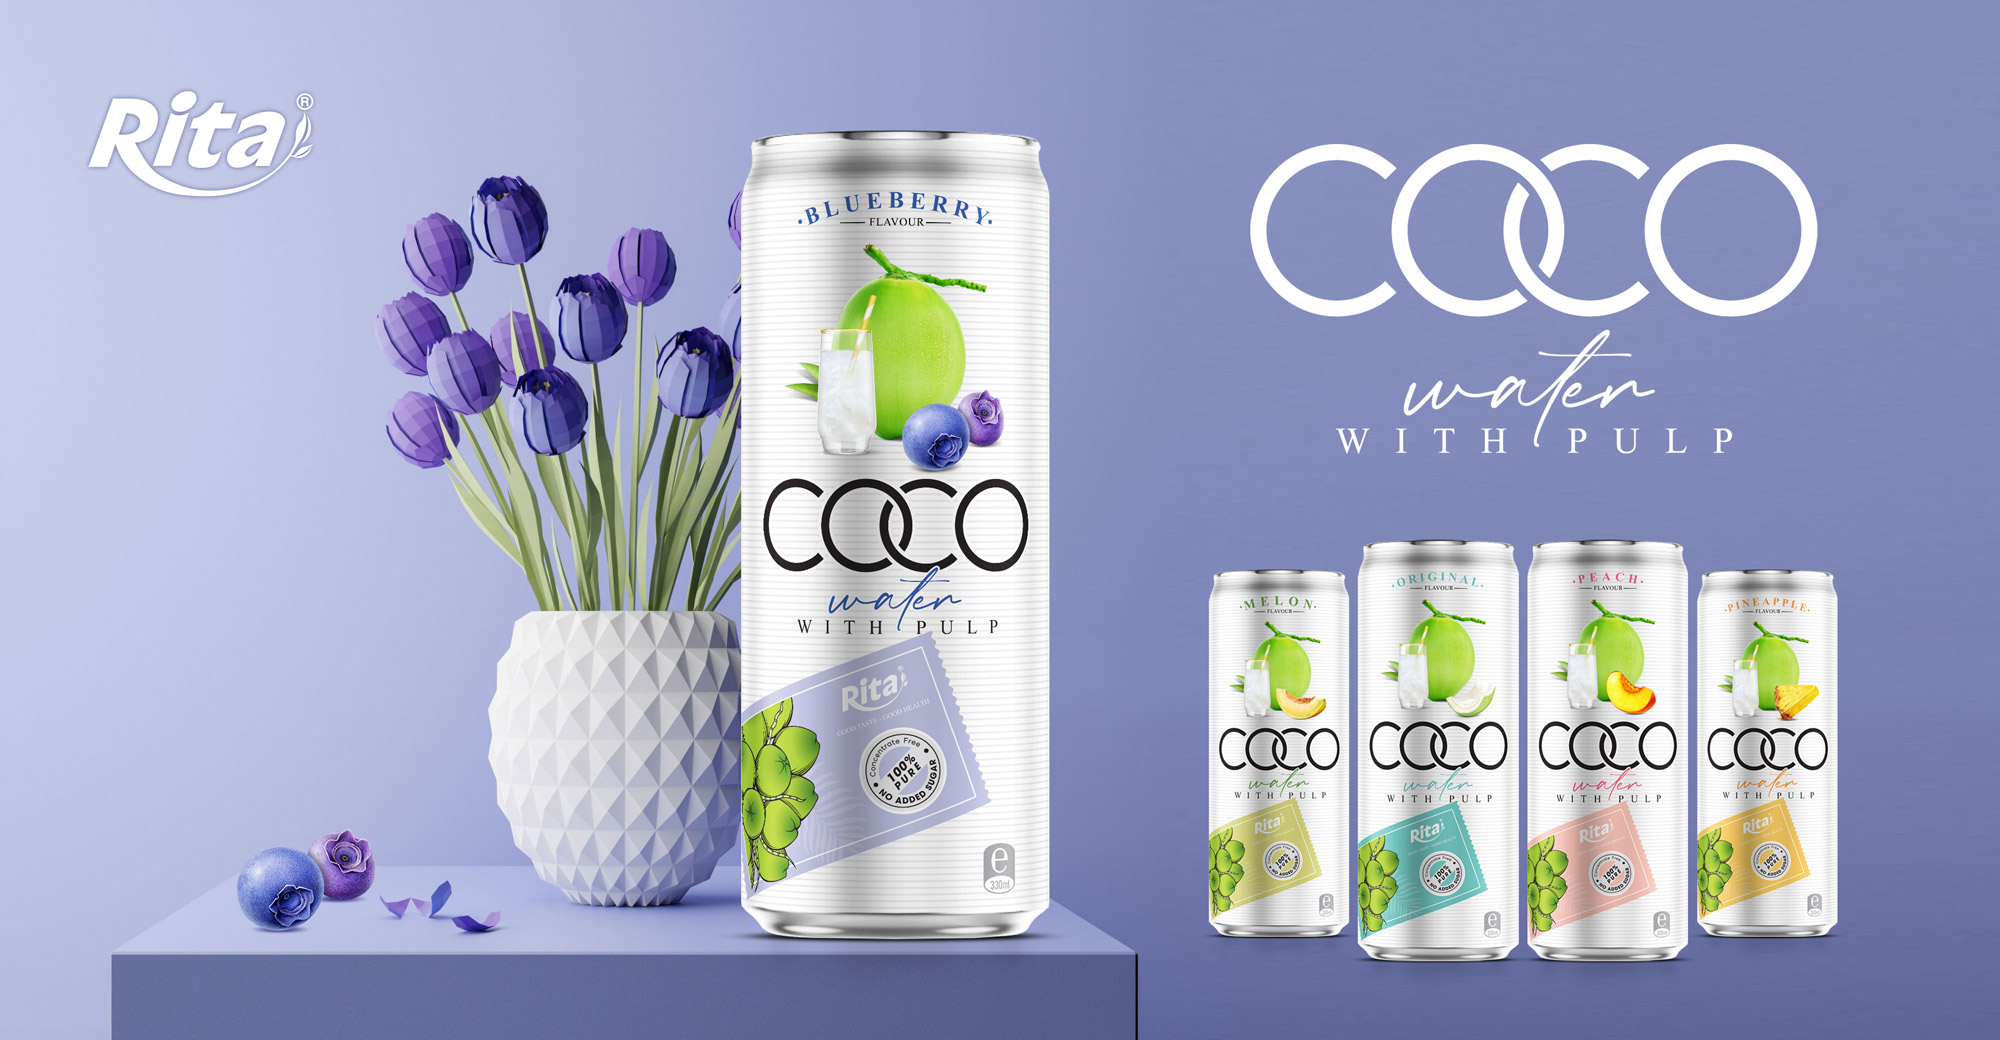 Rita Coco Water With Pulp And Fruit Flavor 330ml Can